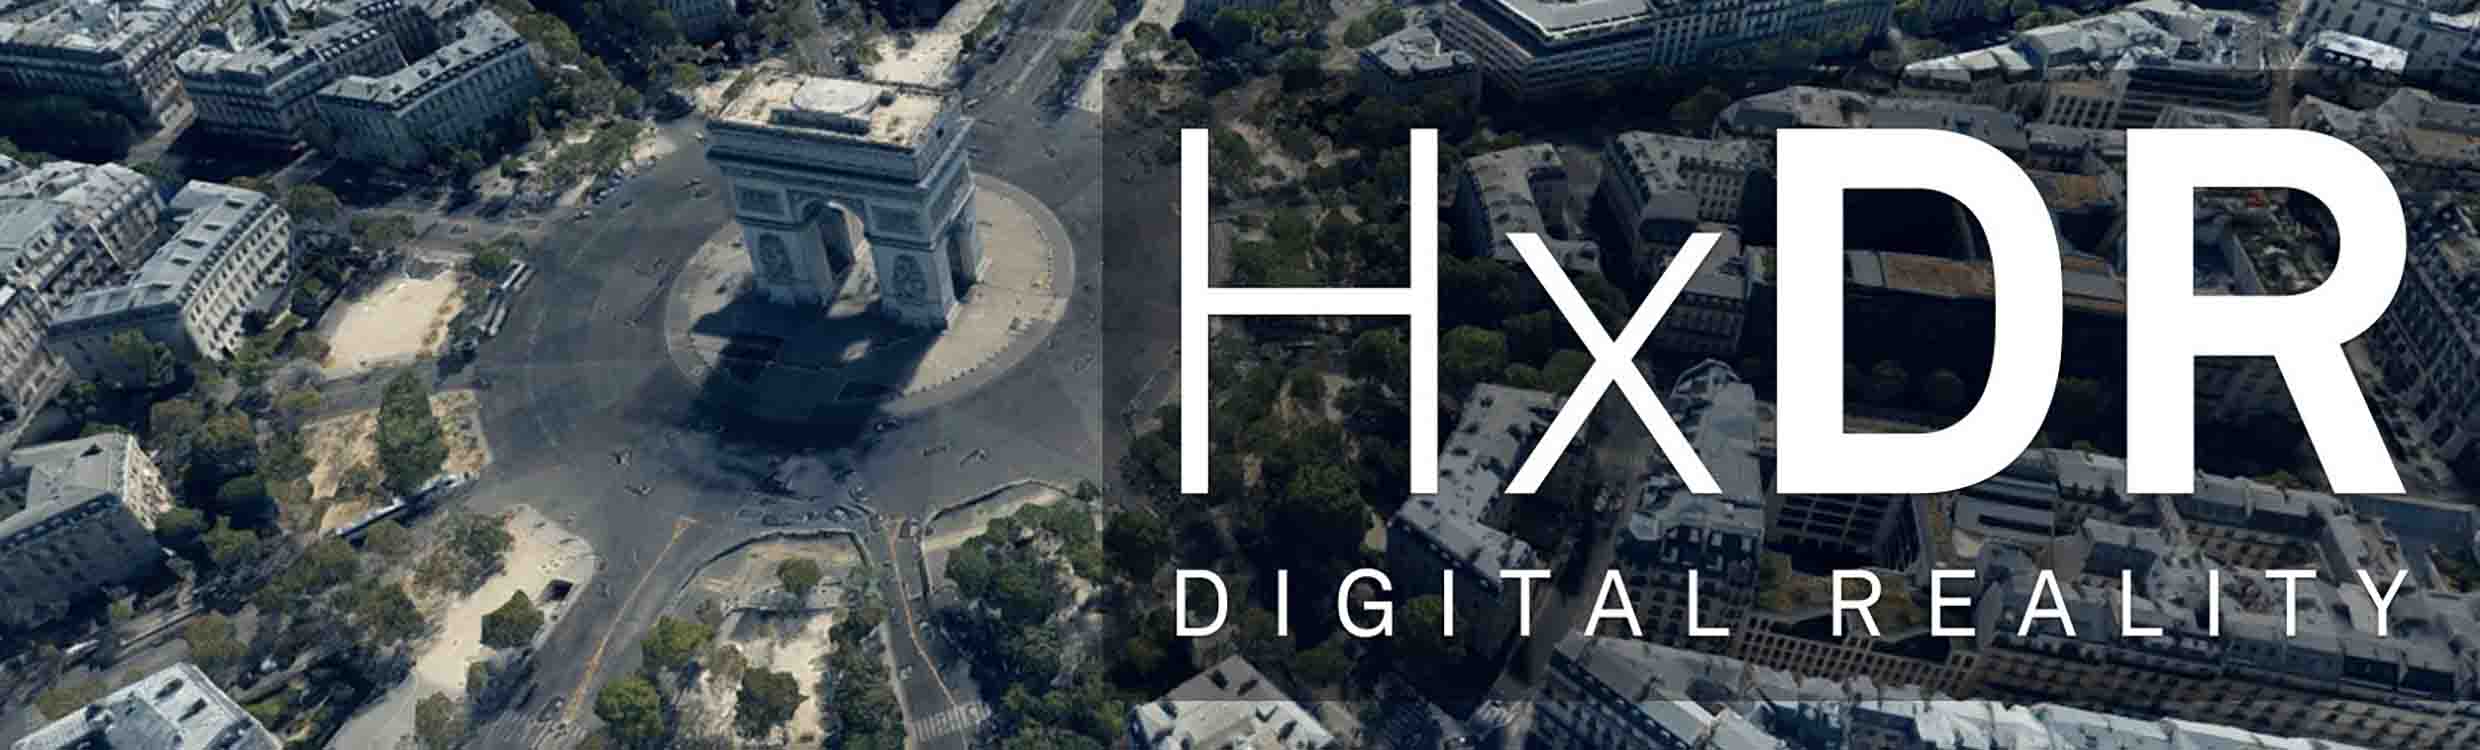 Aerial view over the Arc de triomphe in Paris, France with the text "HxDR Digital Reality"